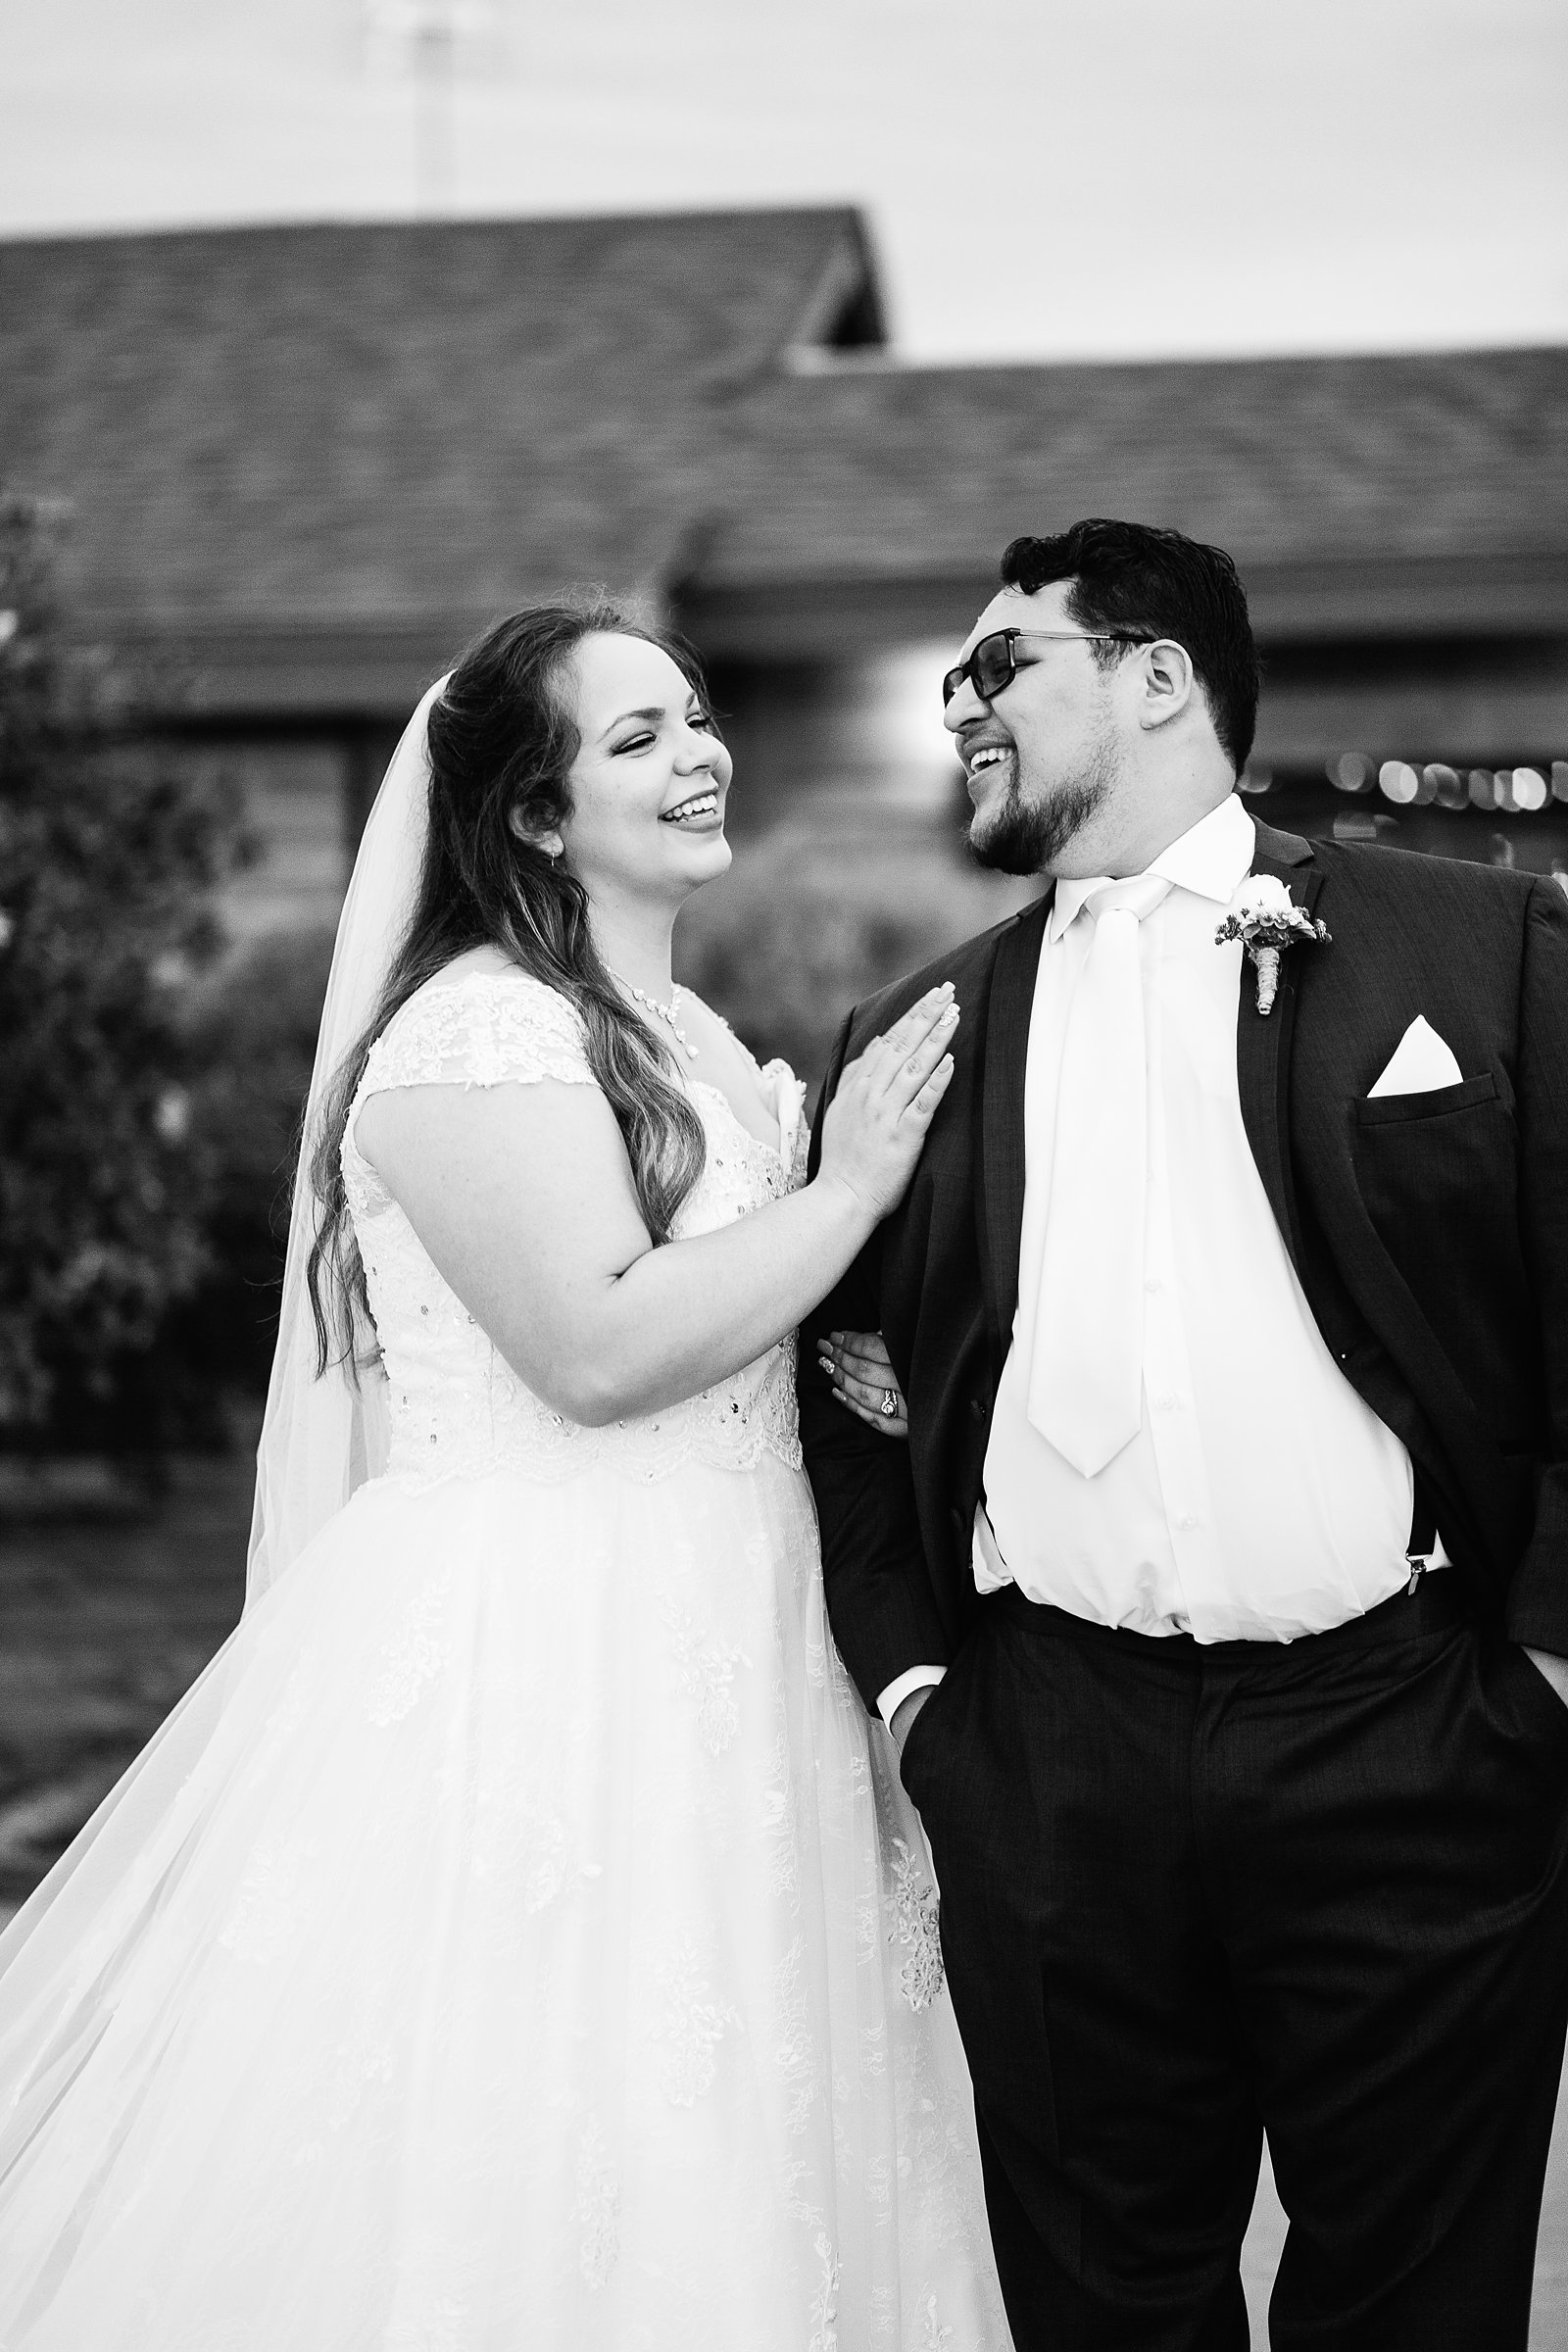 Bride and Groom laughing together during their Backyard wedding by Arizona wedding photographer PMA Photography.